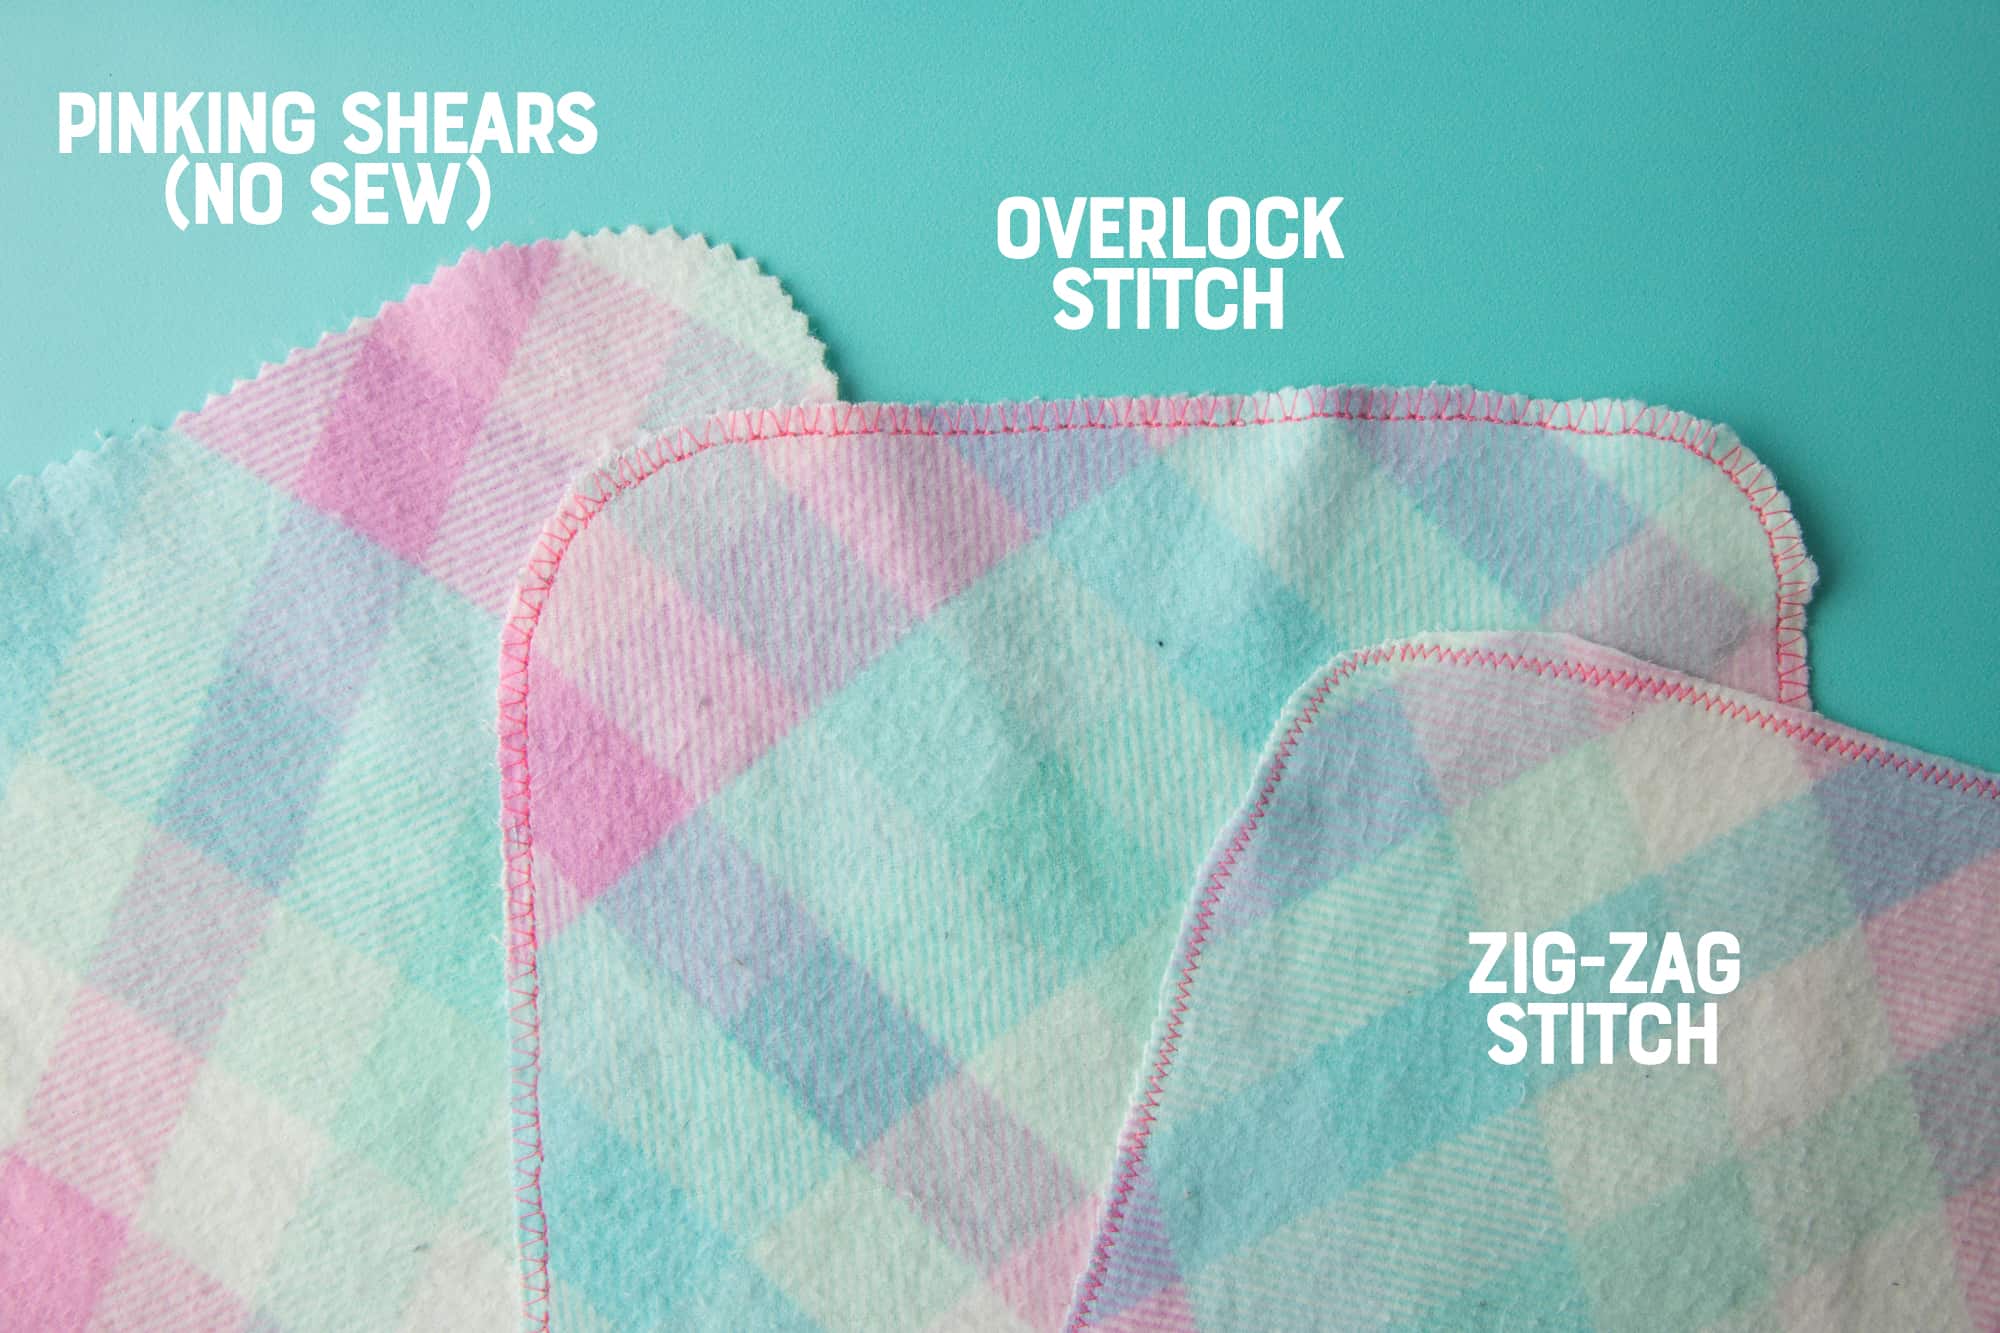 Three types of cloth for reusable toilet paper sit on a blue background, with the labels "pinking shears (no sew", "overlook stitch", and "zig-zag stitch"